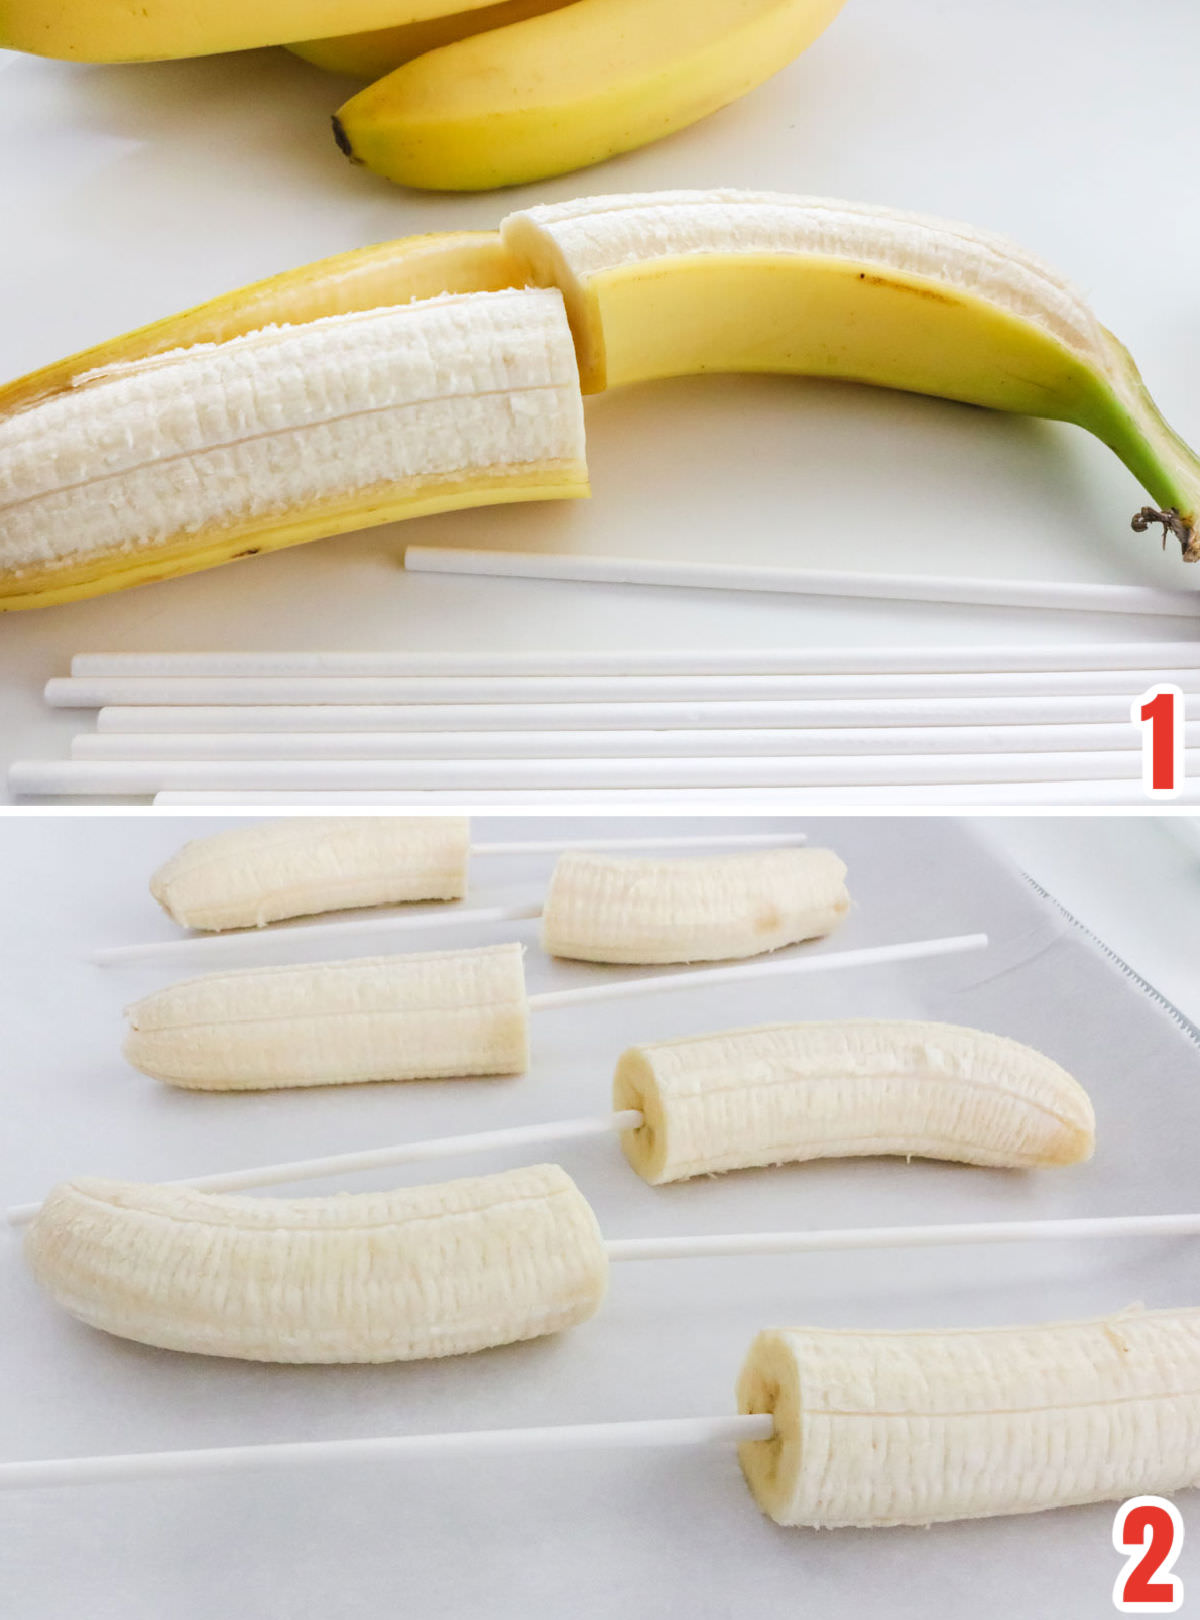 Collage image showing how to prepare the bananas to make a Frozen Banana.